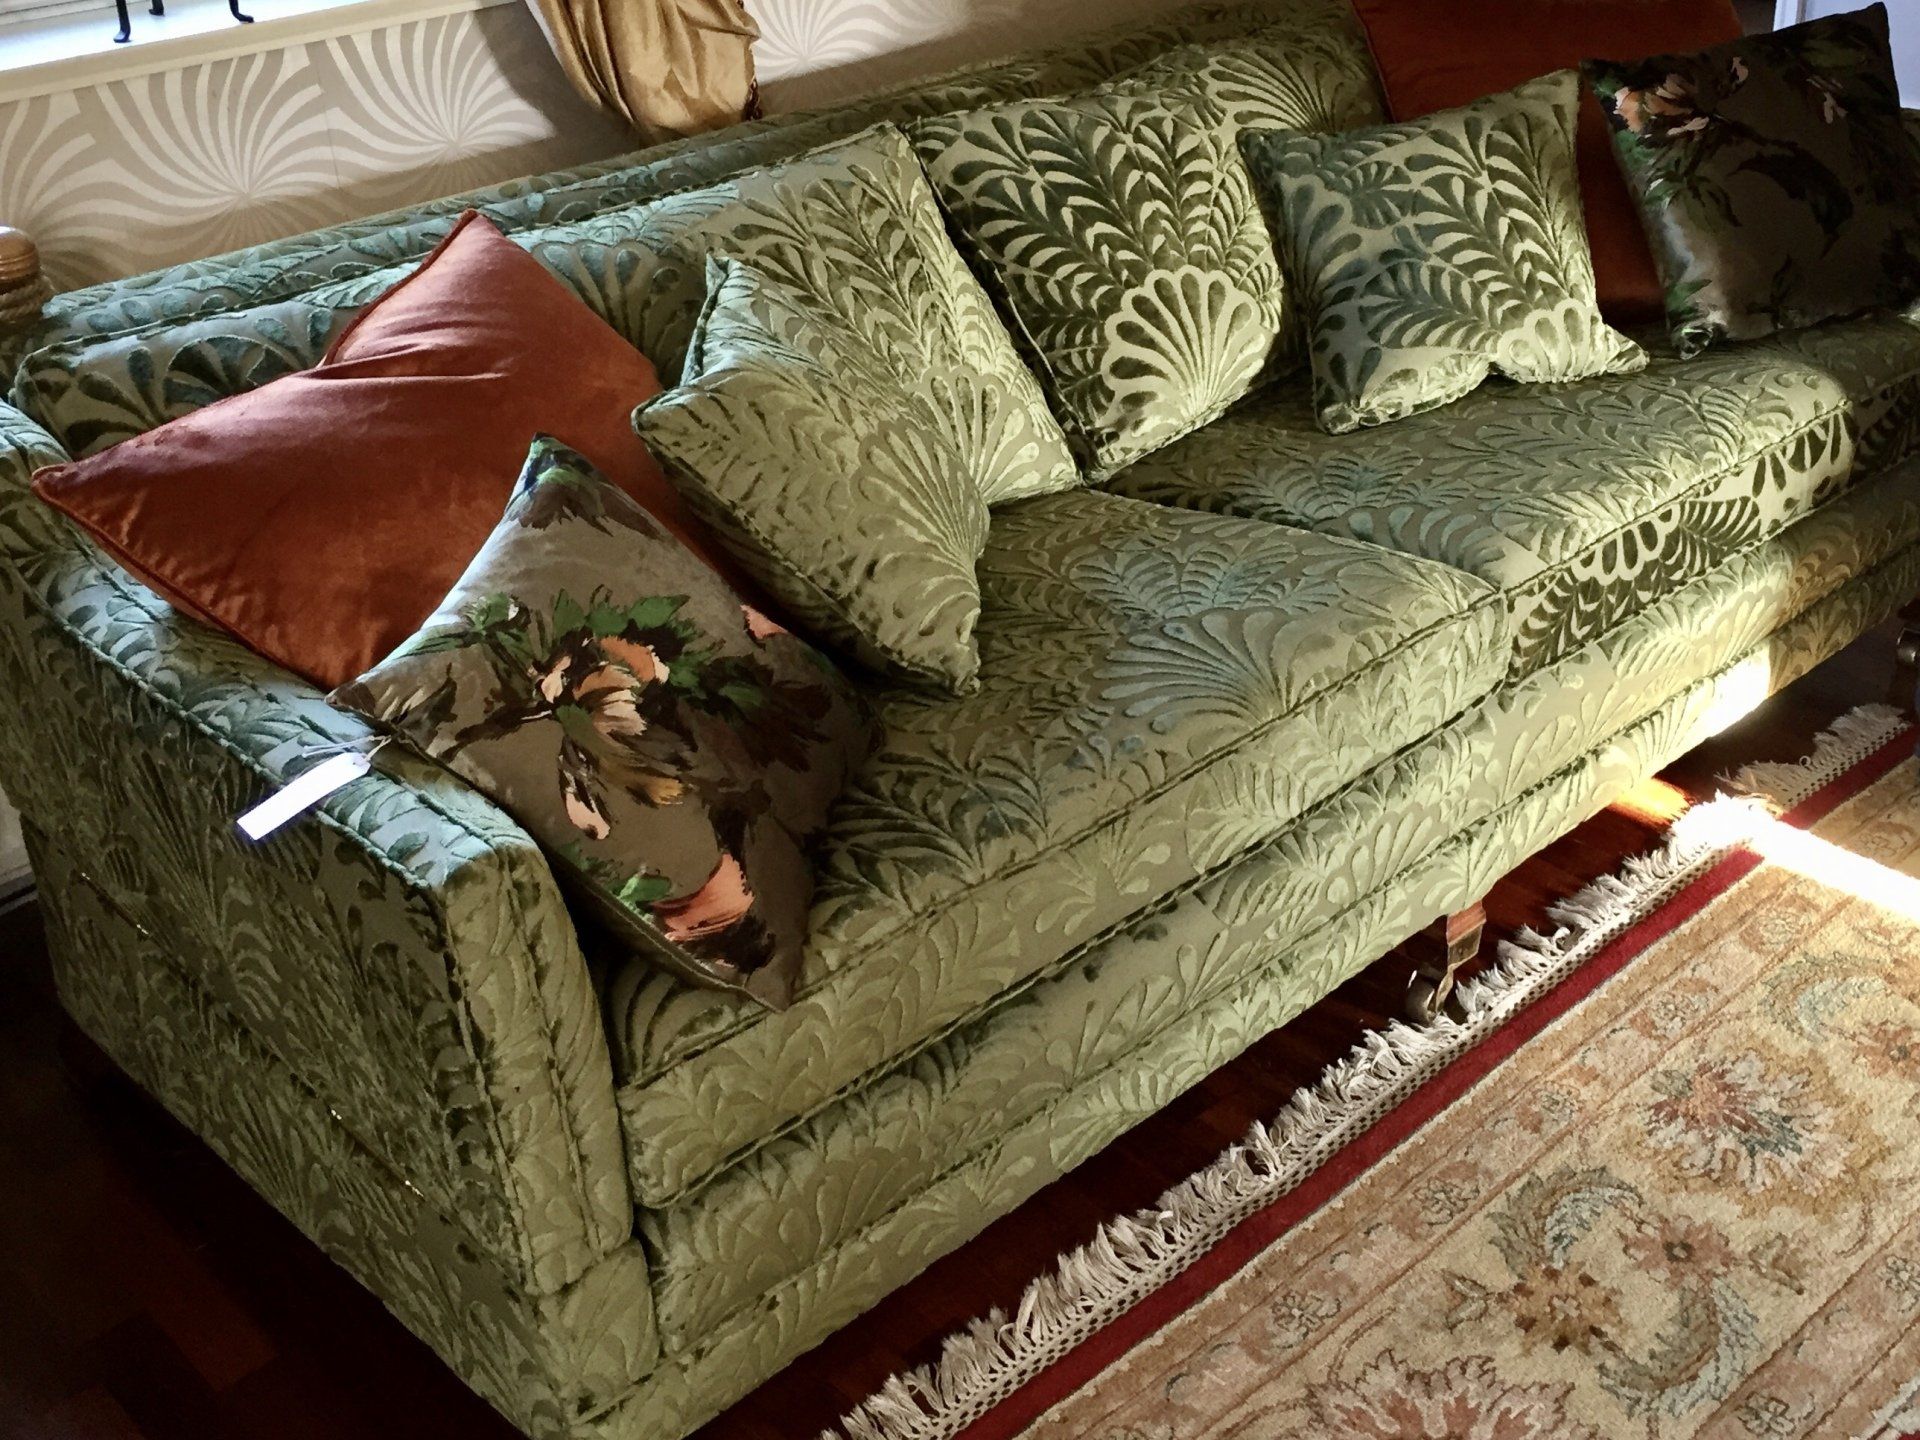 Re-upholstered sofa with new cushion interiors.